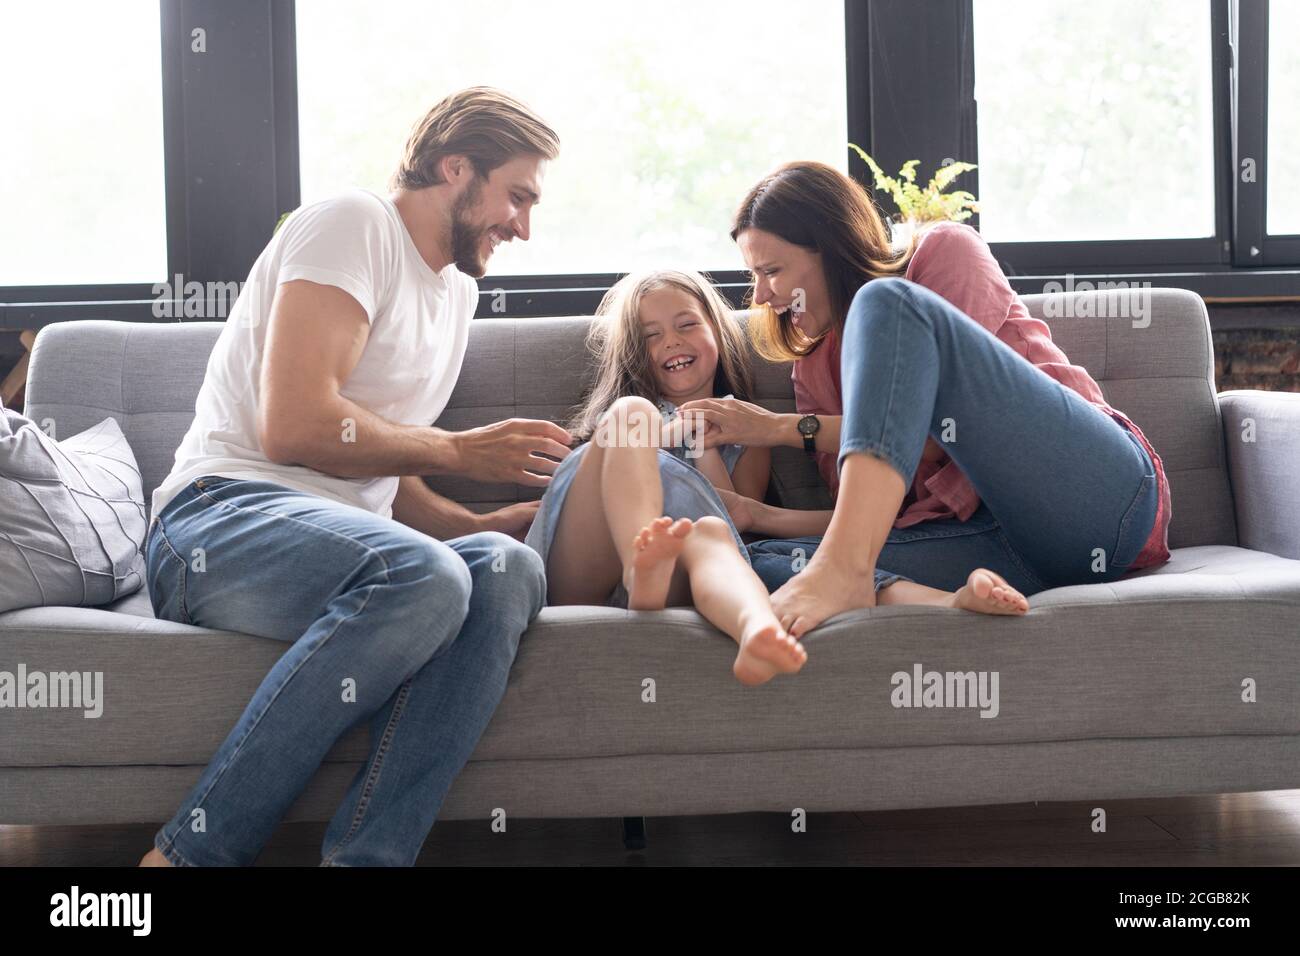 Portrait of family having fun in the living room Stock Photo